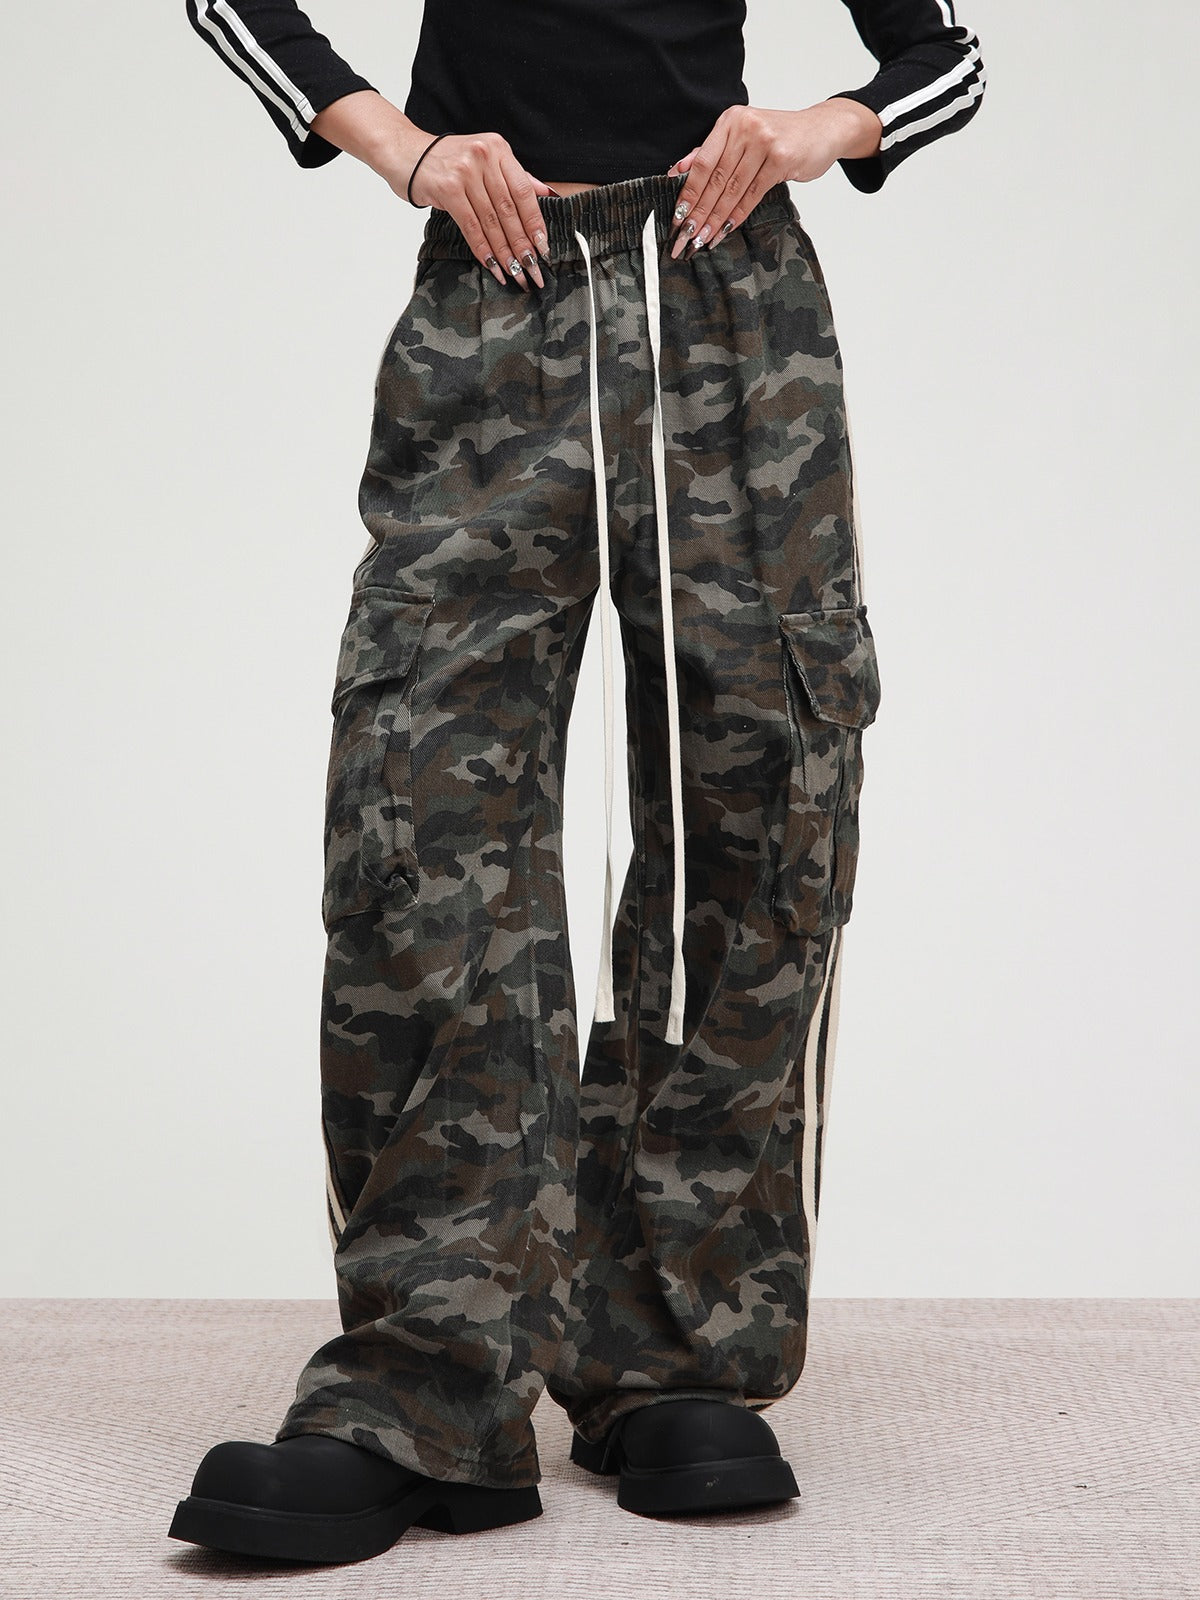 American Lace-up Striped Camouflage Pant